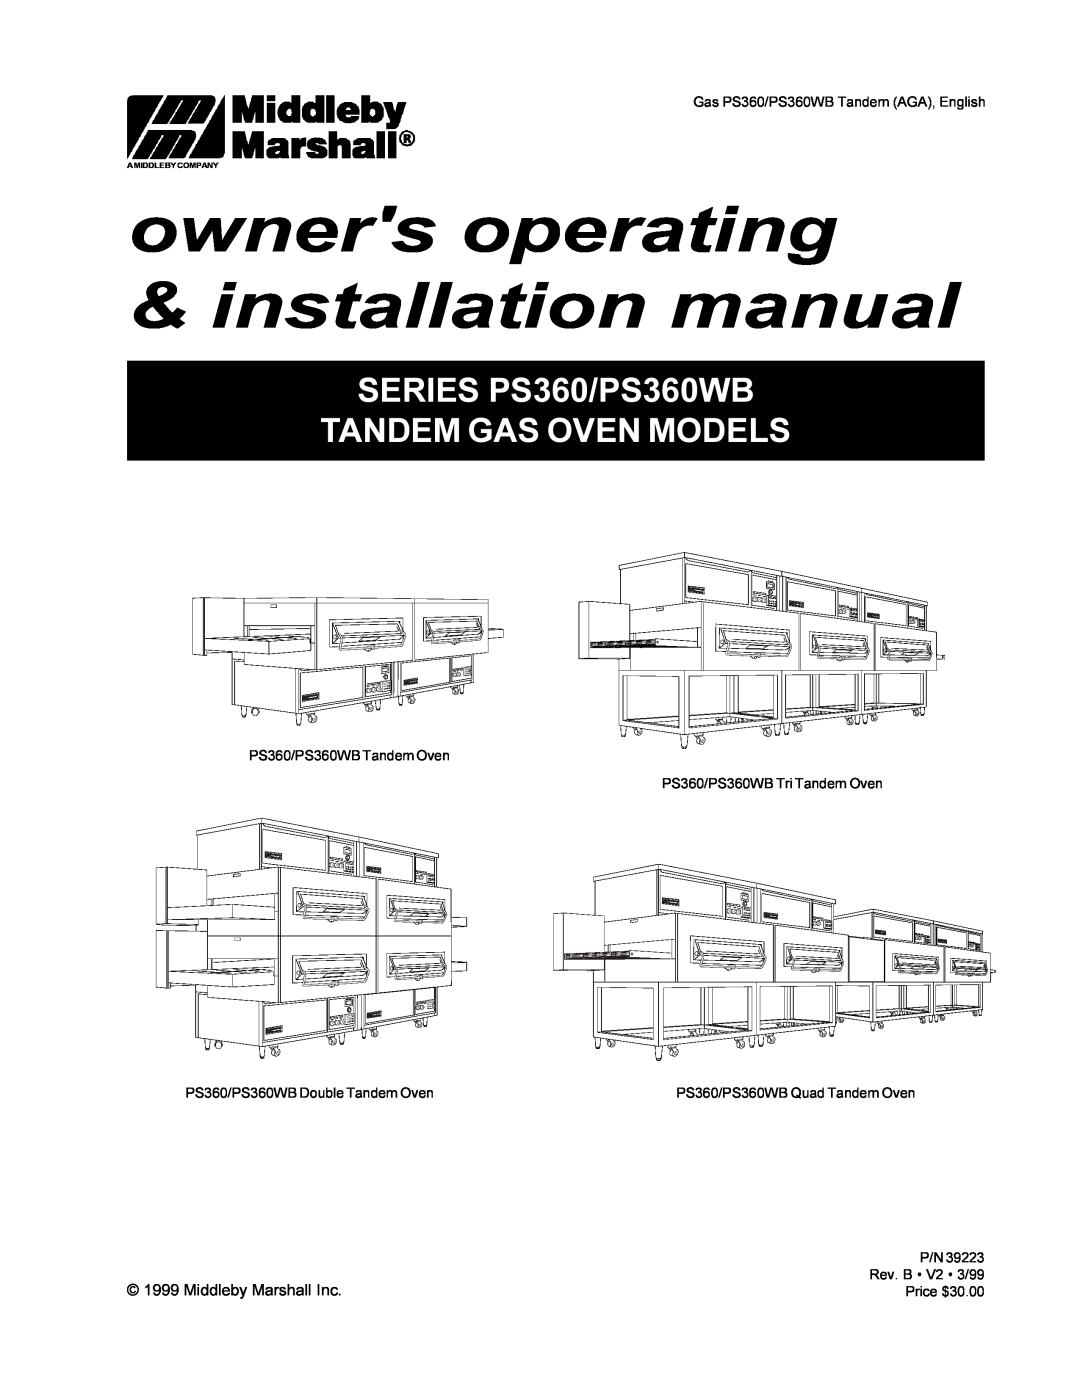 Middleby Marshall PS360 installation manual PS300 Series Gas and Electric Ovens, Owners Operating, Manual, Installation 